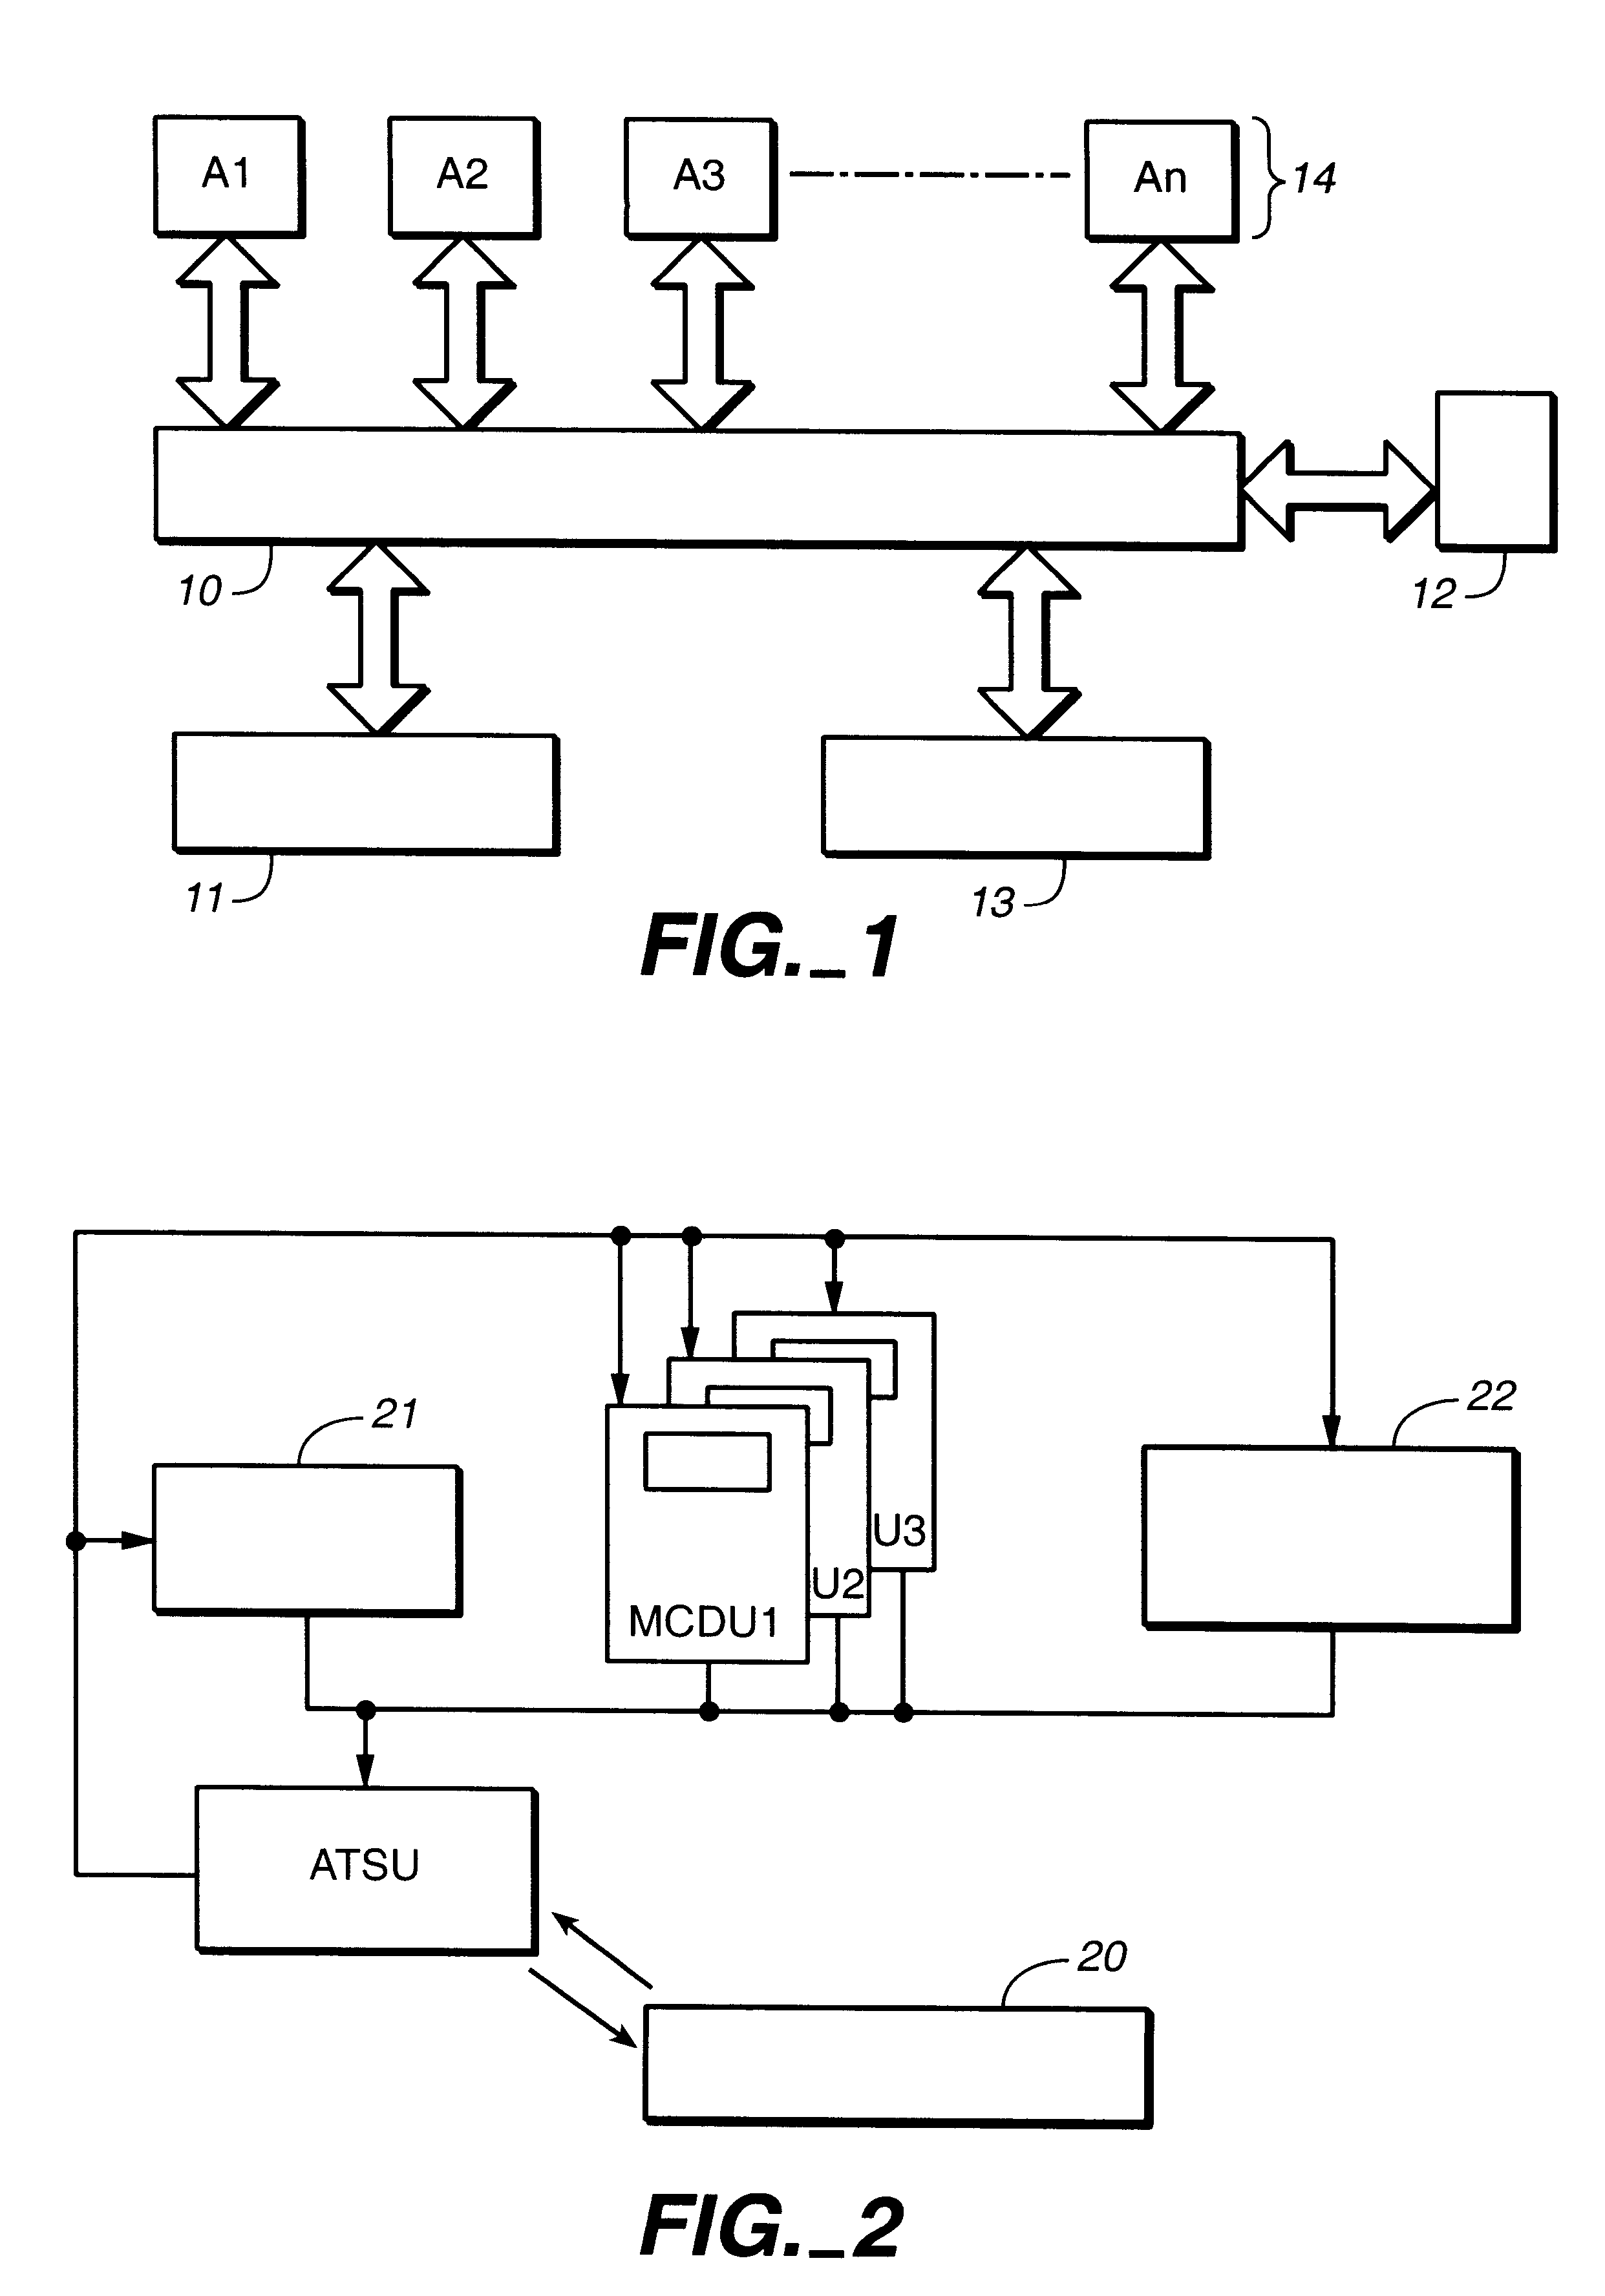 Method for implementing an air traffic service unit